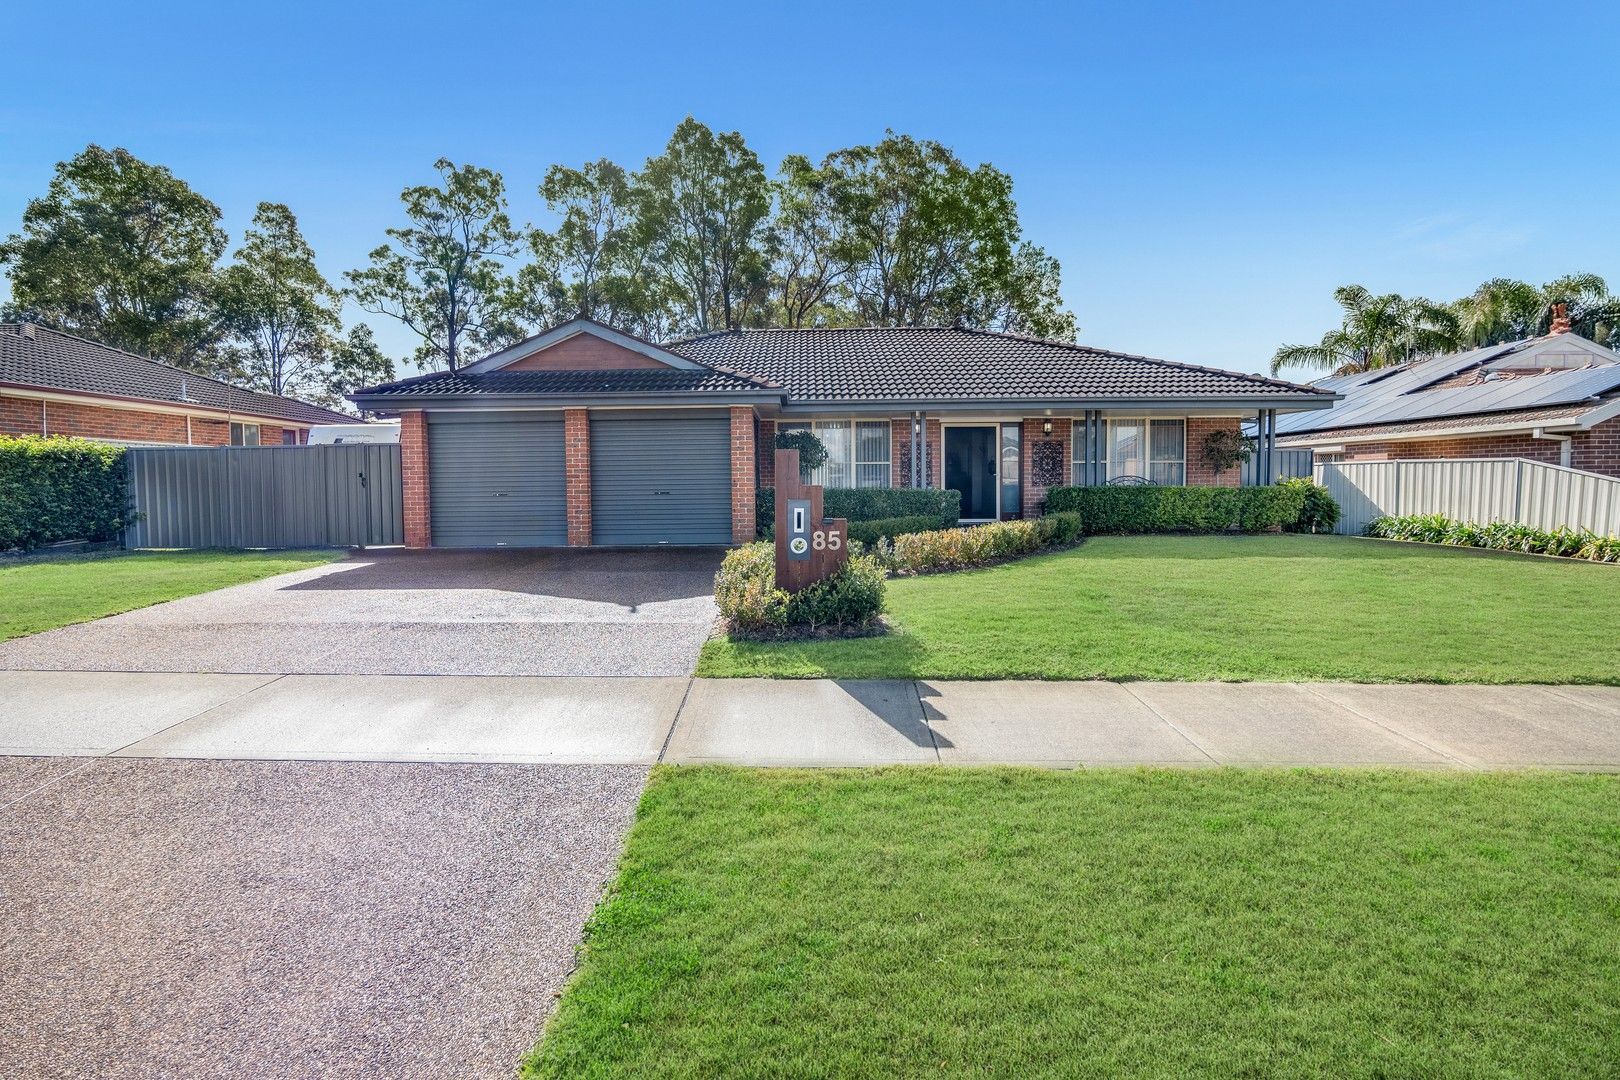 4 bedrooms House in 85 South Seas Drive ASHTONFIELD NSW, 2323